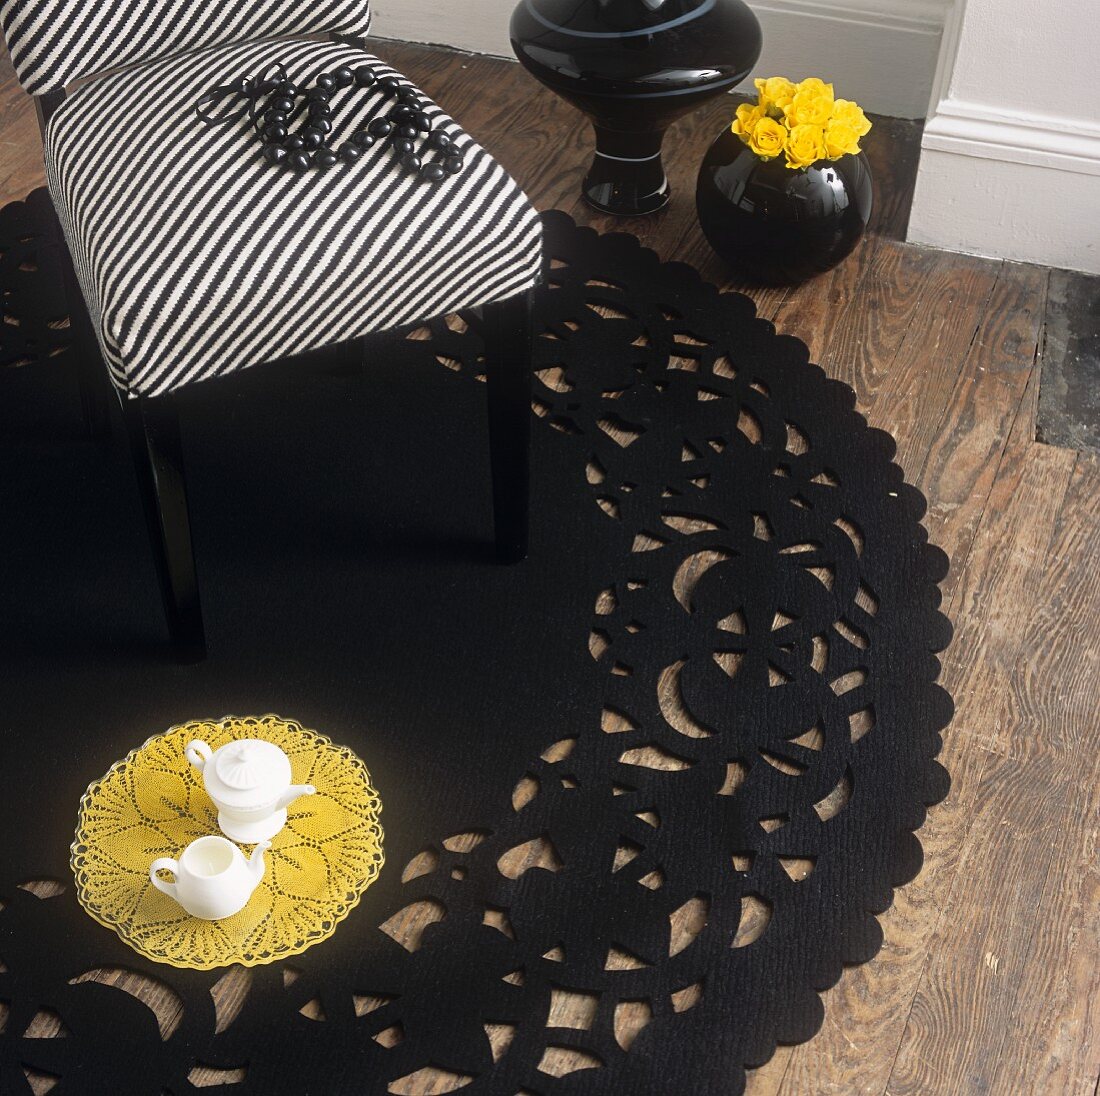 A chair with a striped cover on a round black rug